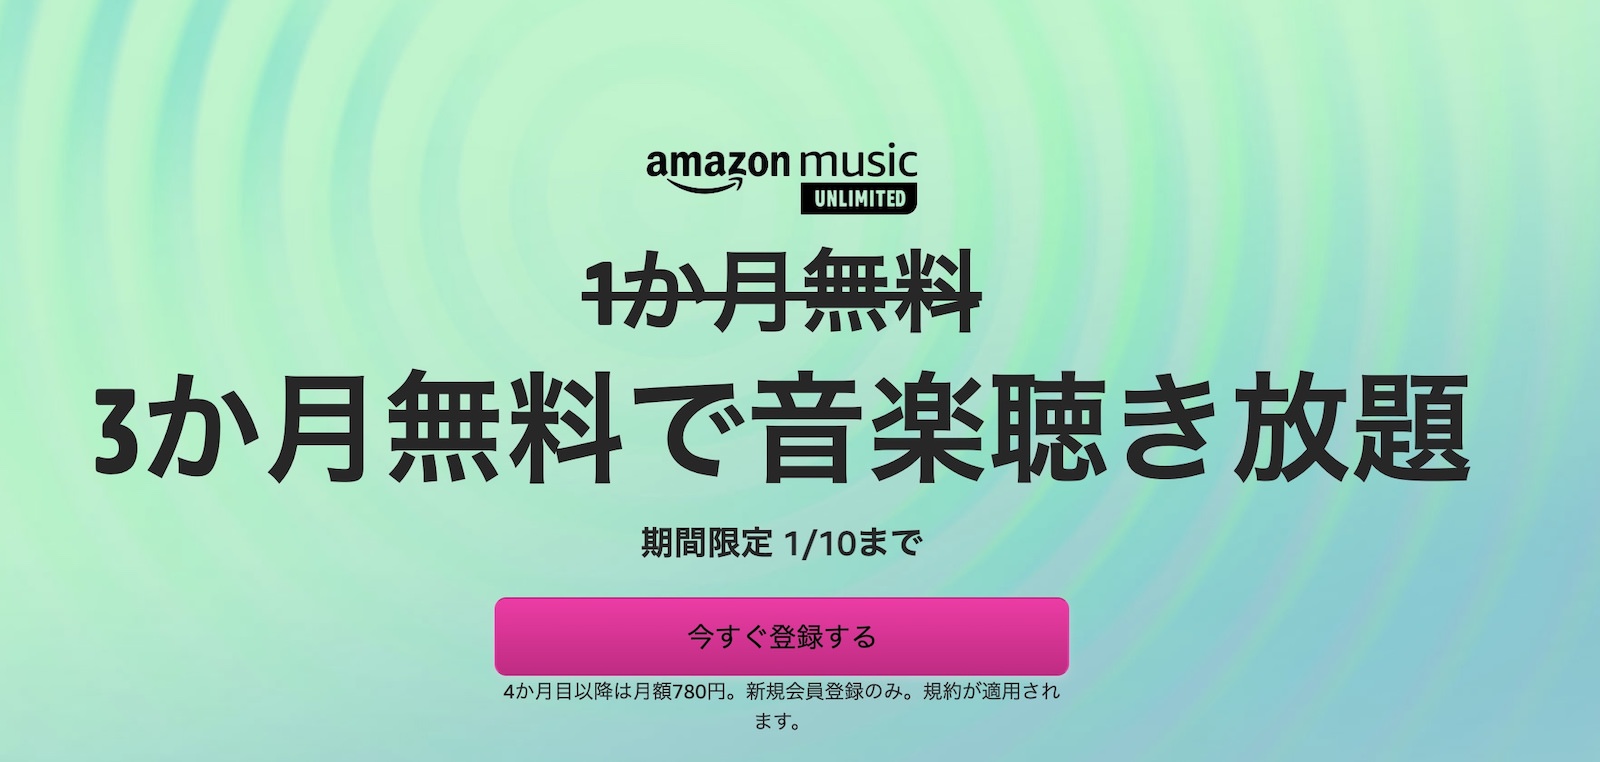 amazon-music-unlimited-3month-free-trial.jpg